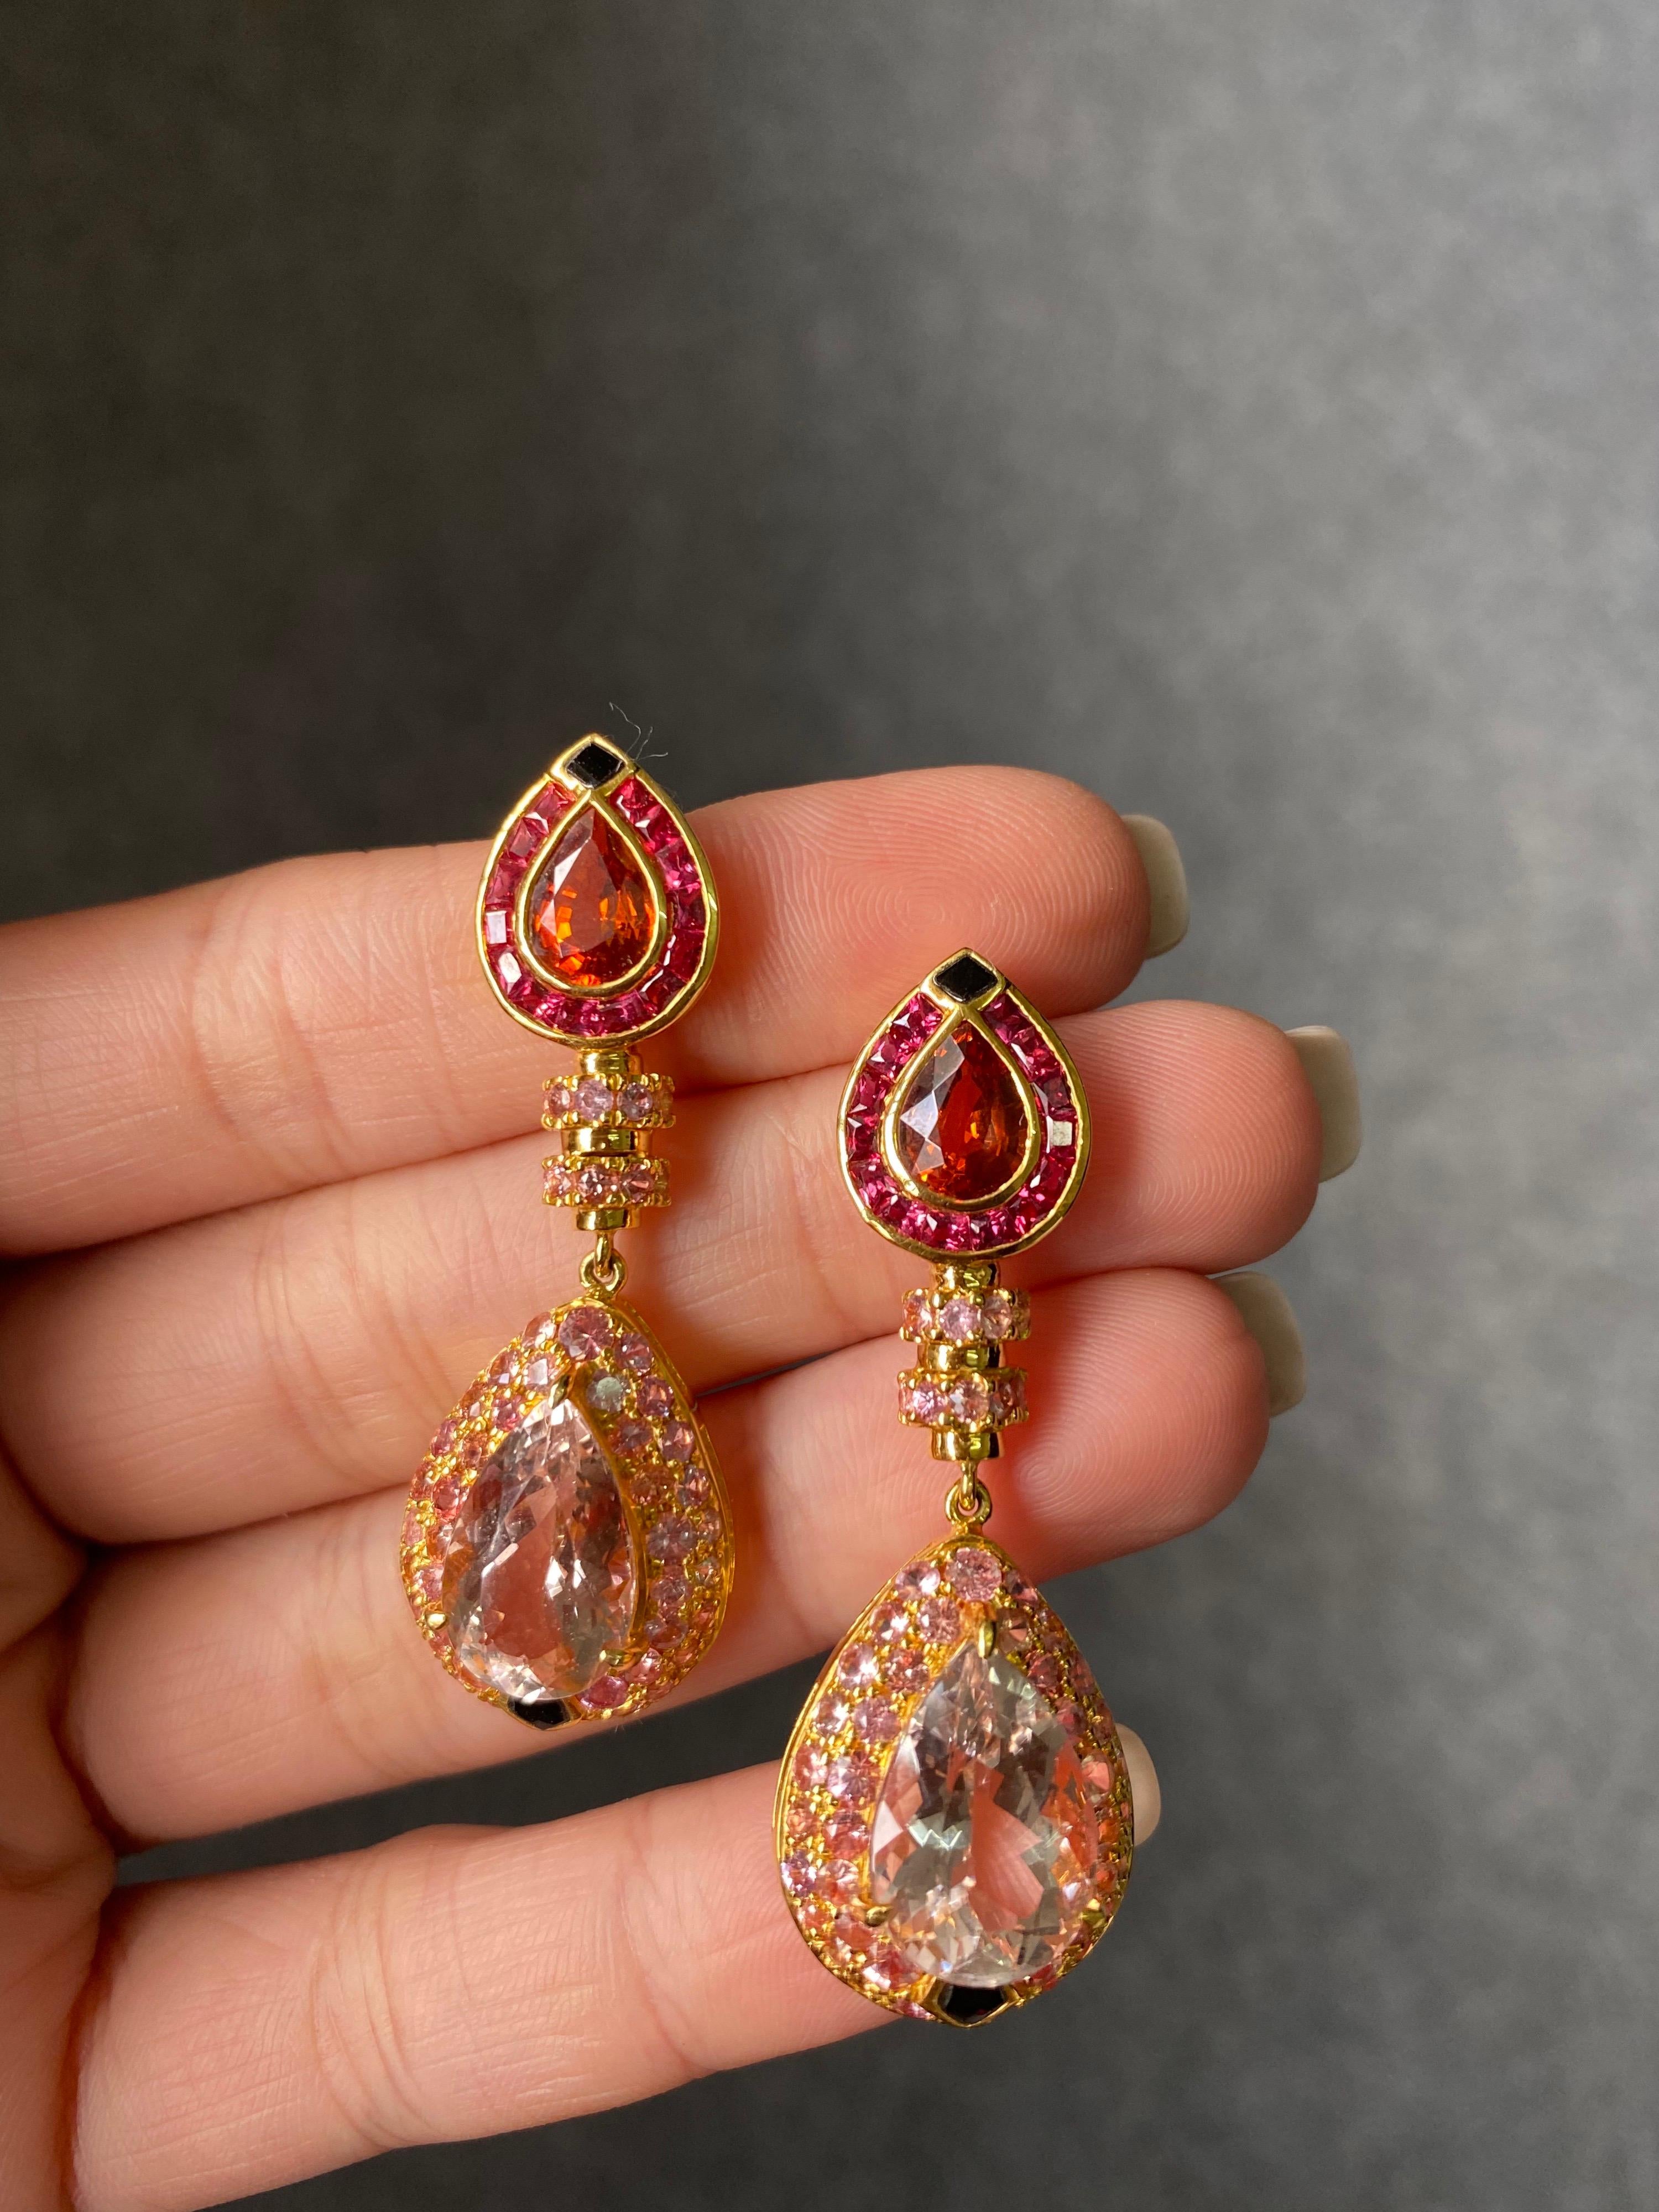 A very unique, art-deco inspired 3 carat Mandarin Garnet and 9.50 carat Kunzite earrings, with black onyx - all set in solid 18K Yellow Gold. 
The earrings are around 4cm long, and comes with a push pull backing. 
We provide free shipping and we